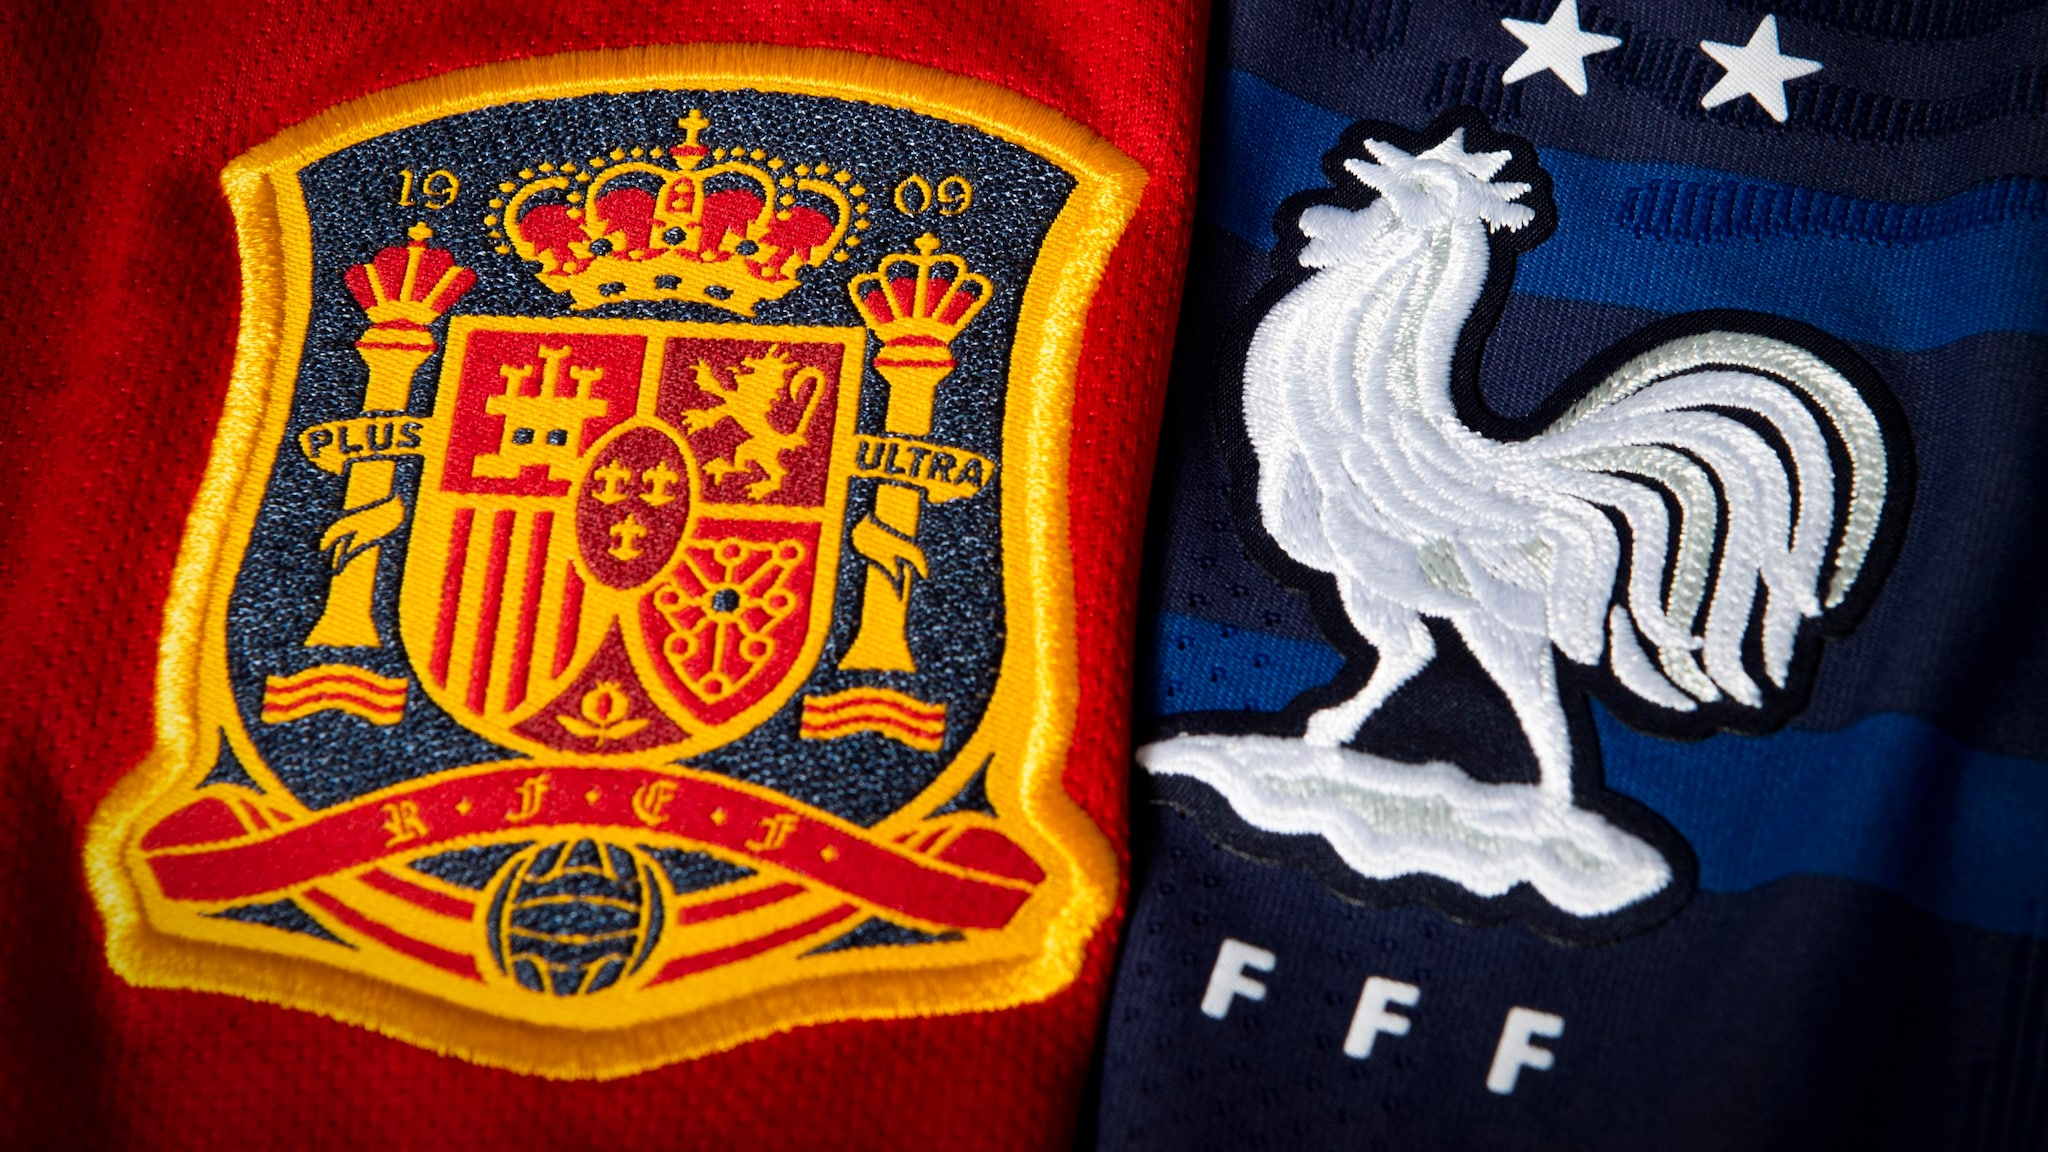 Spain vs France UEFA Nations League final preview: where to watch, TV channels and live streams, team news, form guide. UEFA Nations League